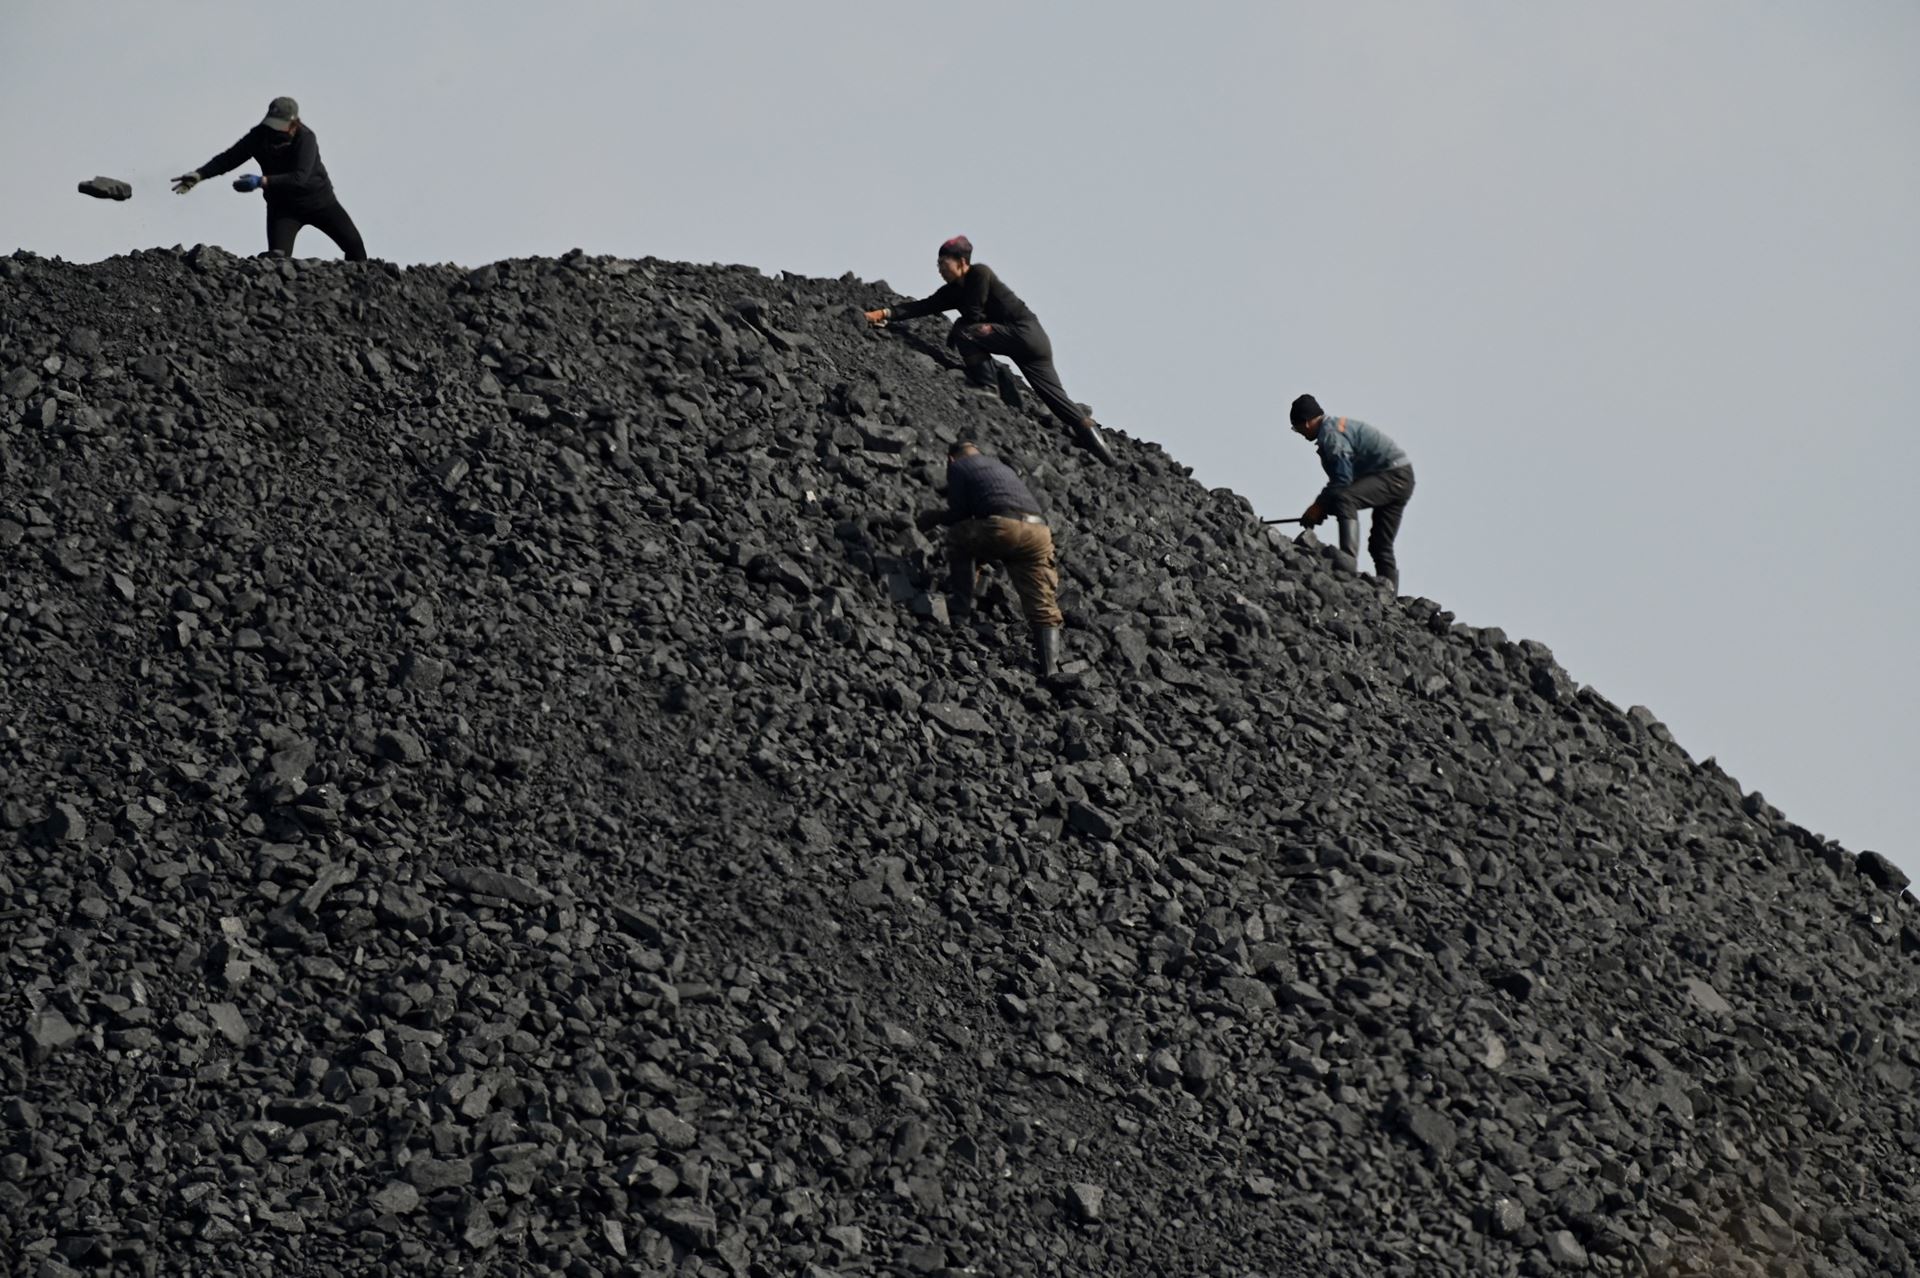 Coal production in Russia will decrease to 439 million tons by 2026